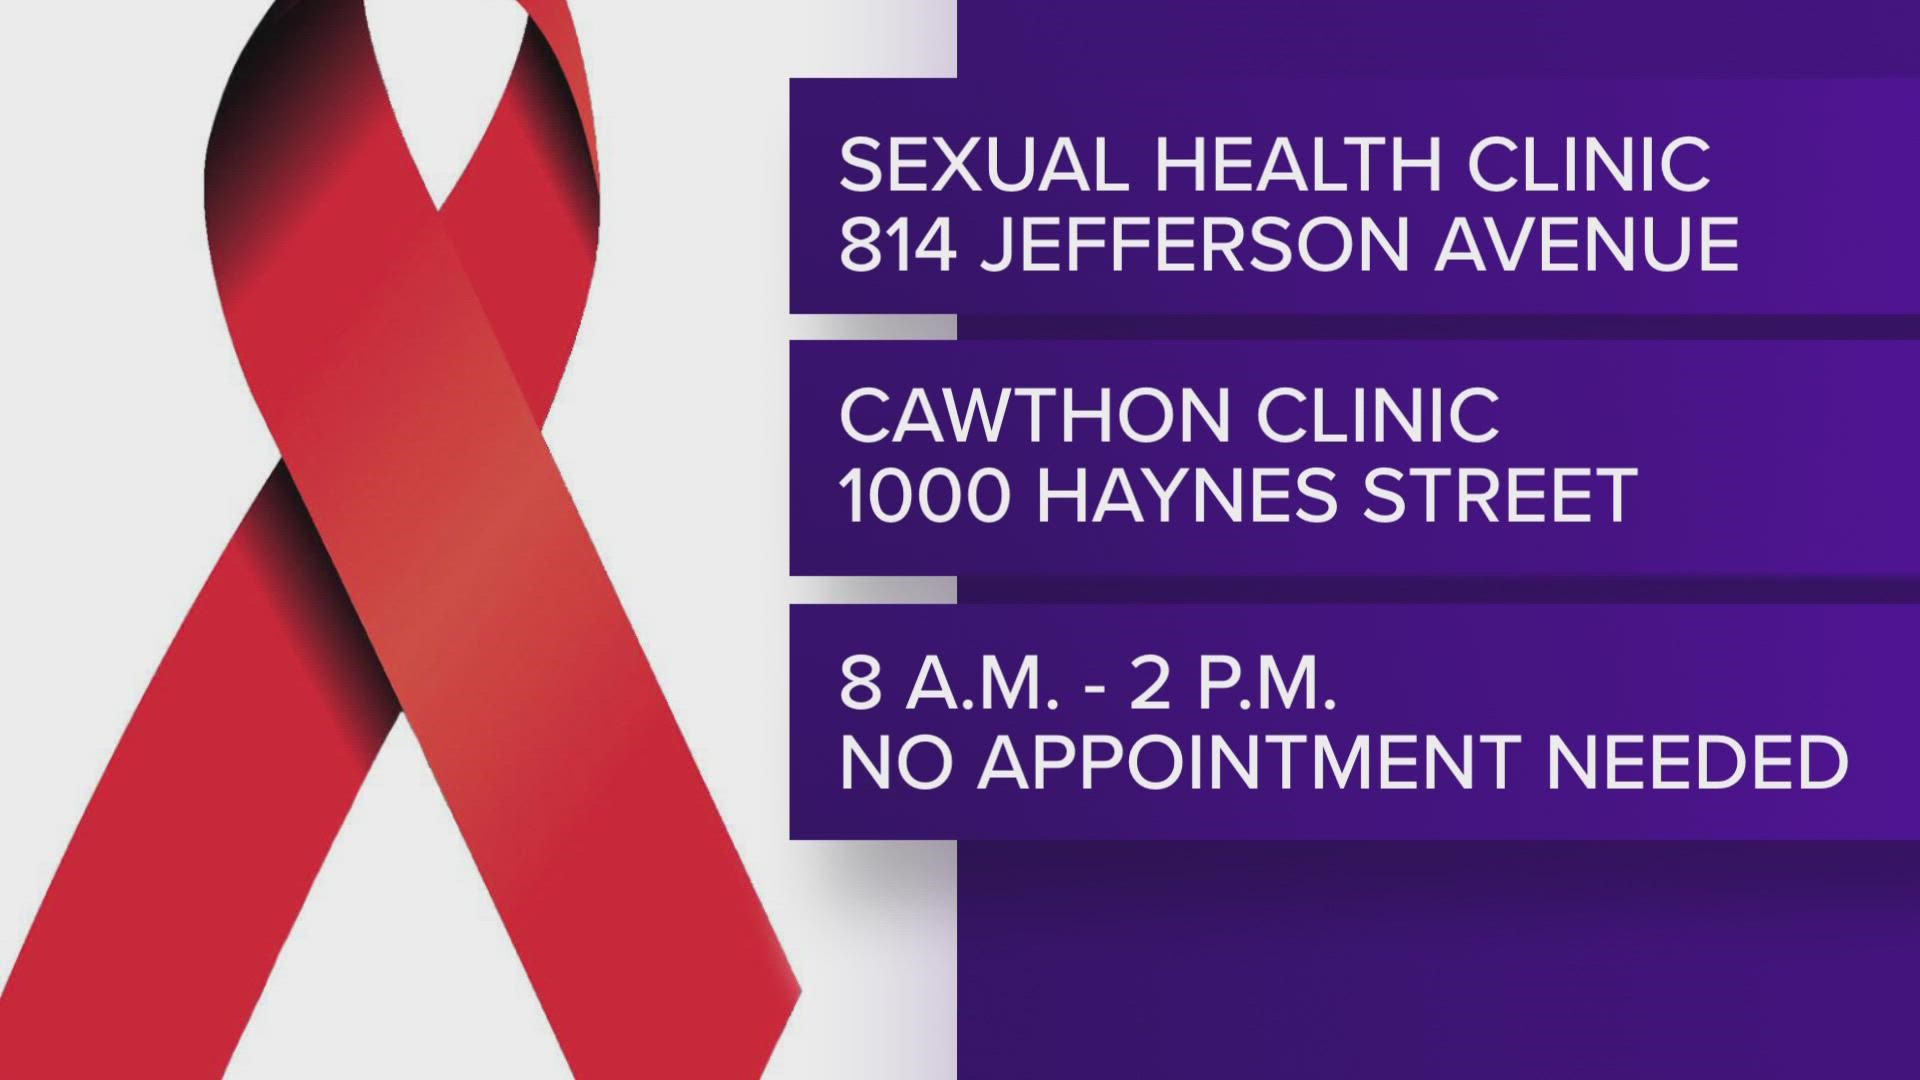 Neither the sexual health clinic on Jefferson Avenue and the Cawthon Clinic on Haynes Street require appointments on June 27.